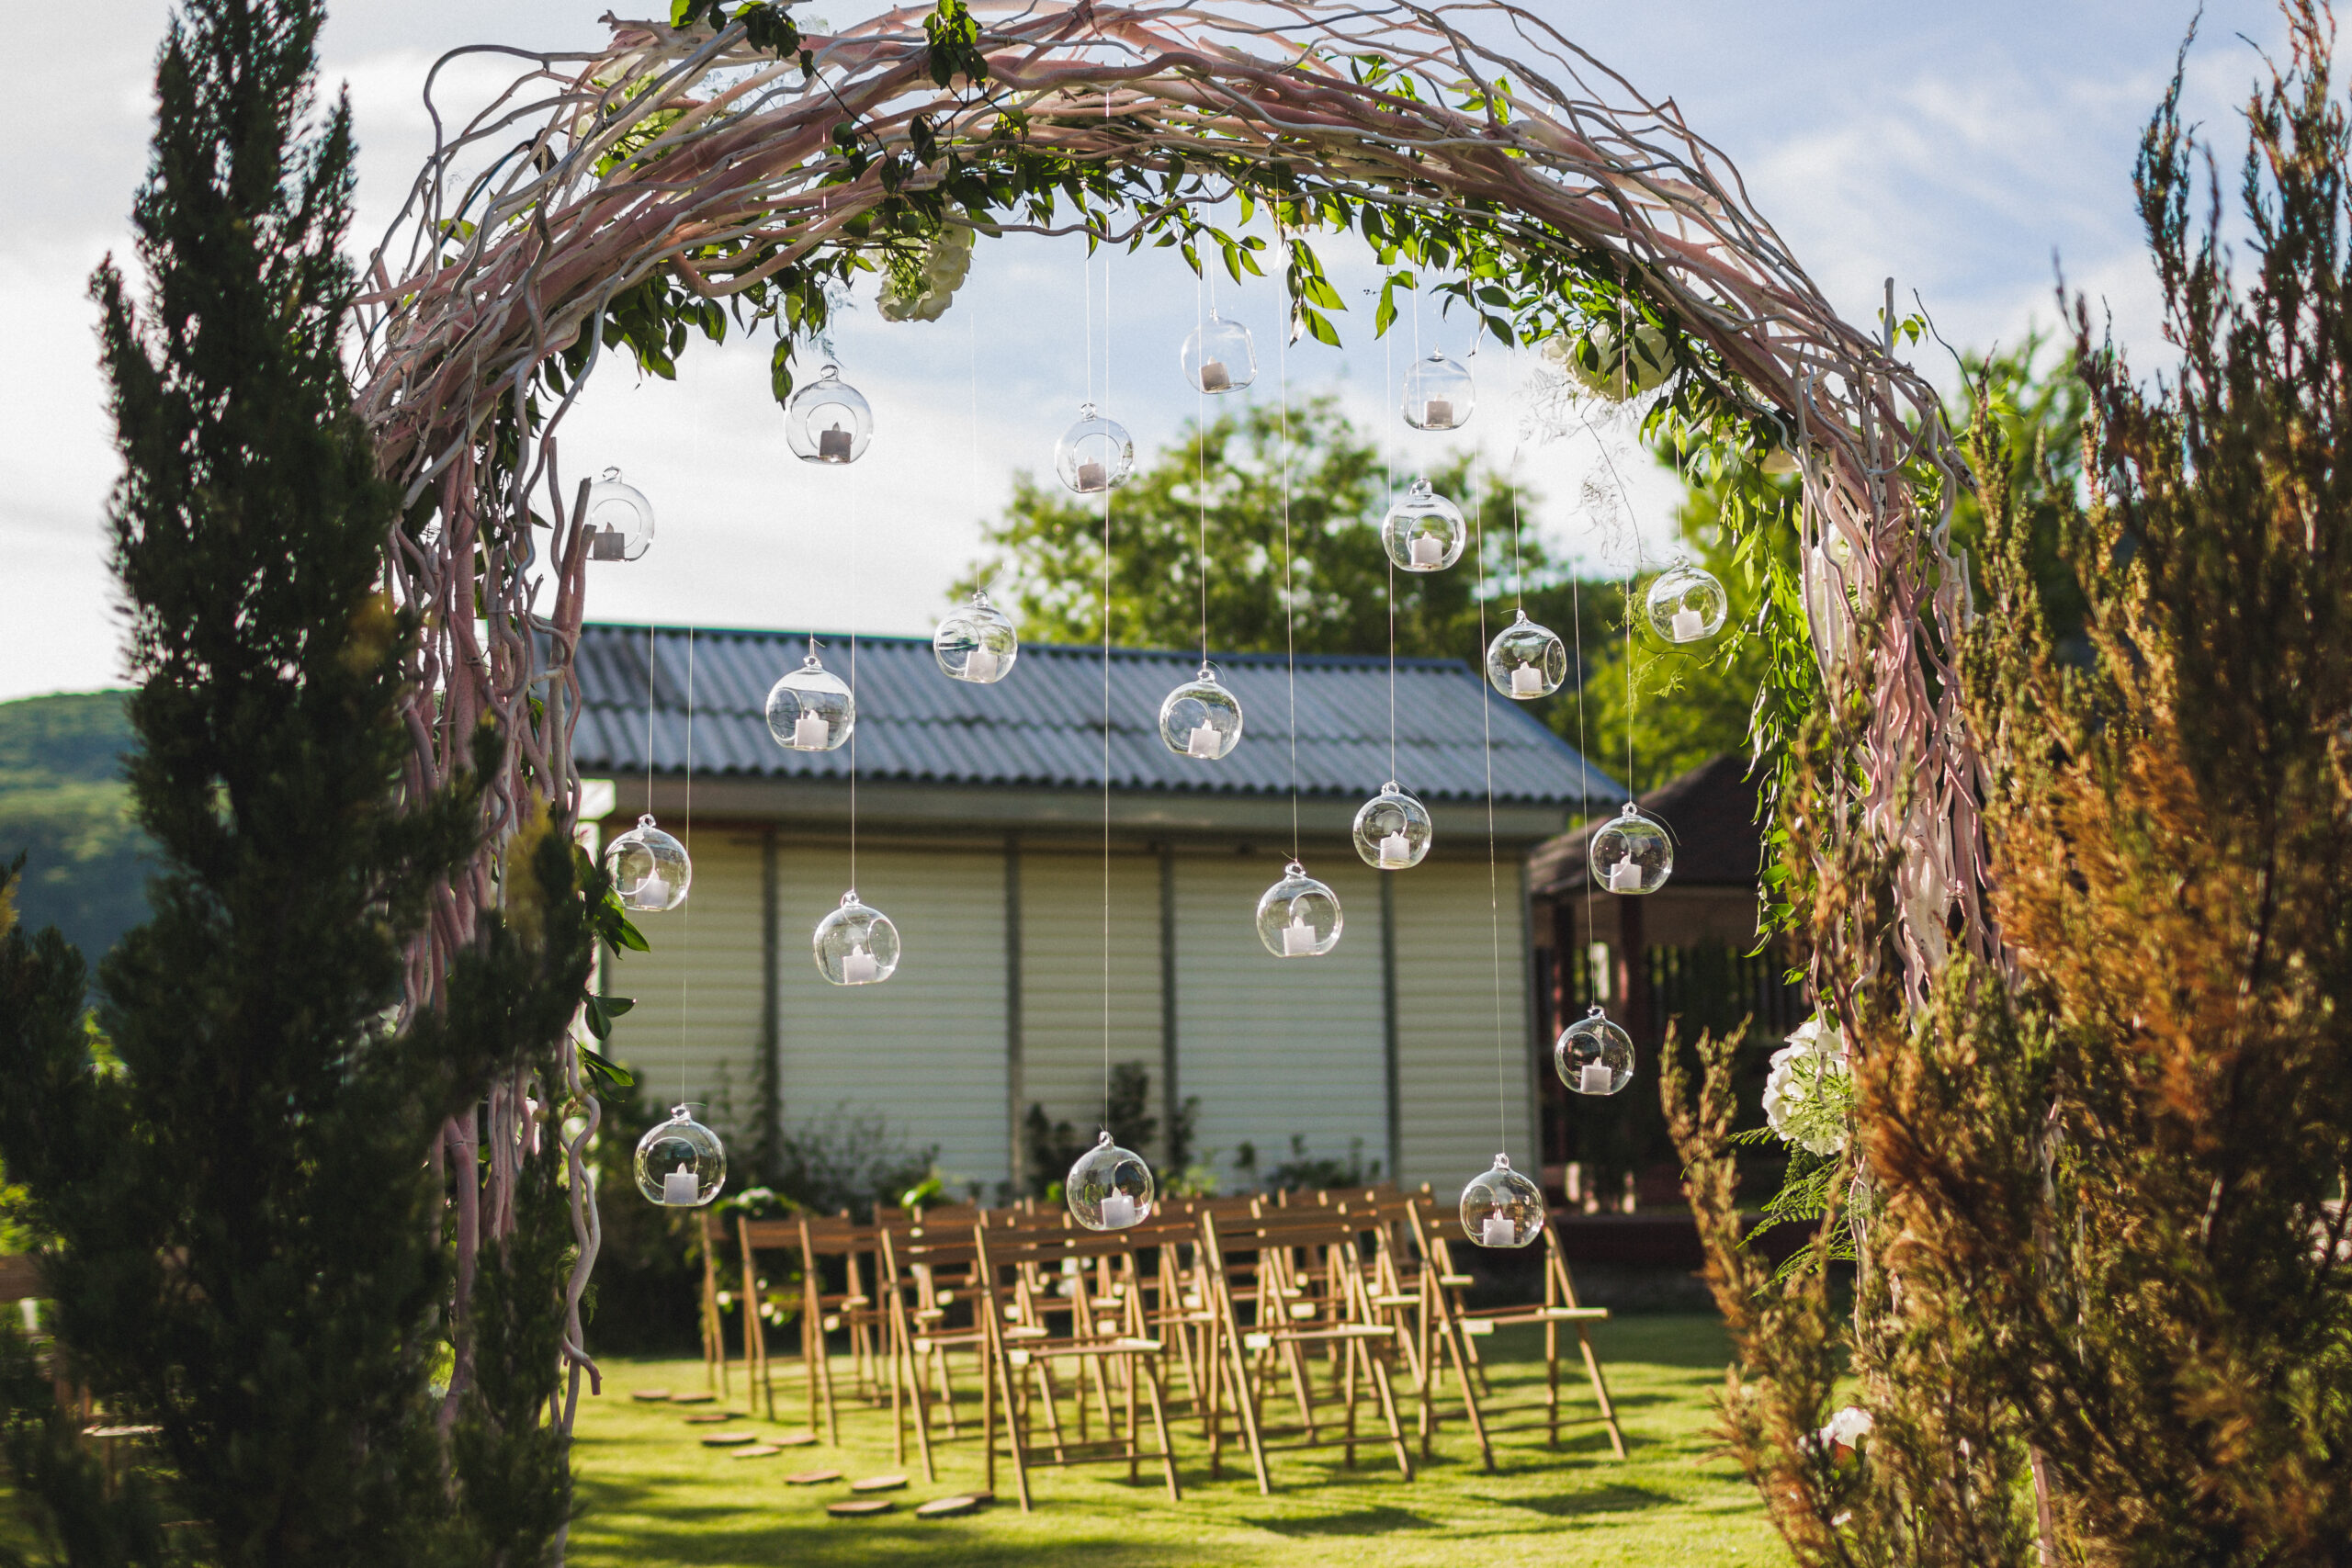 Evening wedding ceremony in garden, arch with white branches, brown wooden chairs and a lot of lights hanging in glass spheres